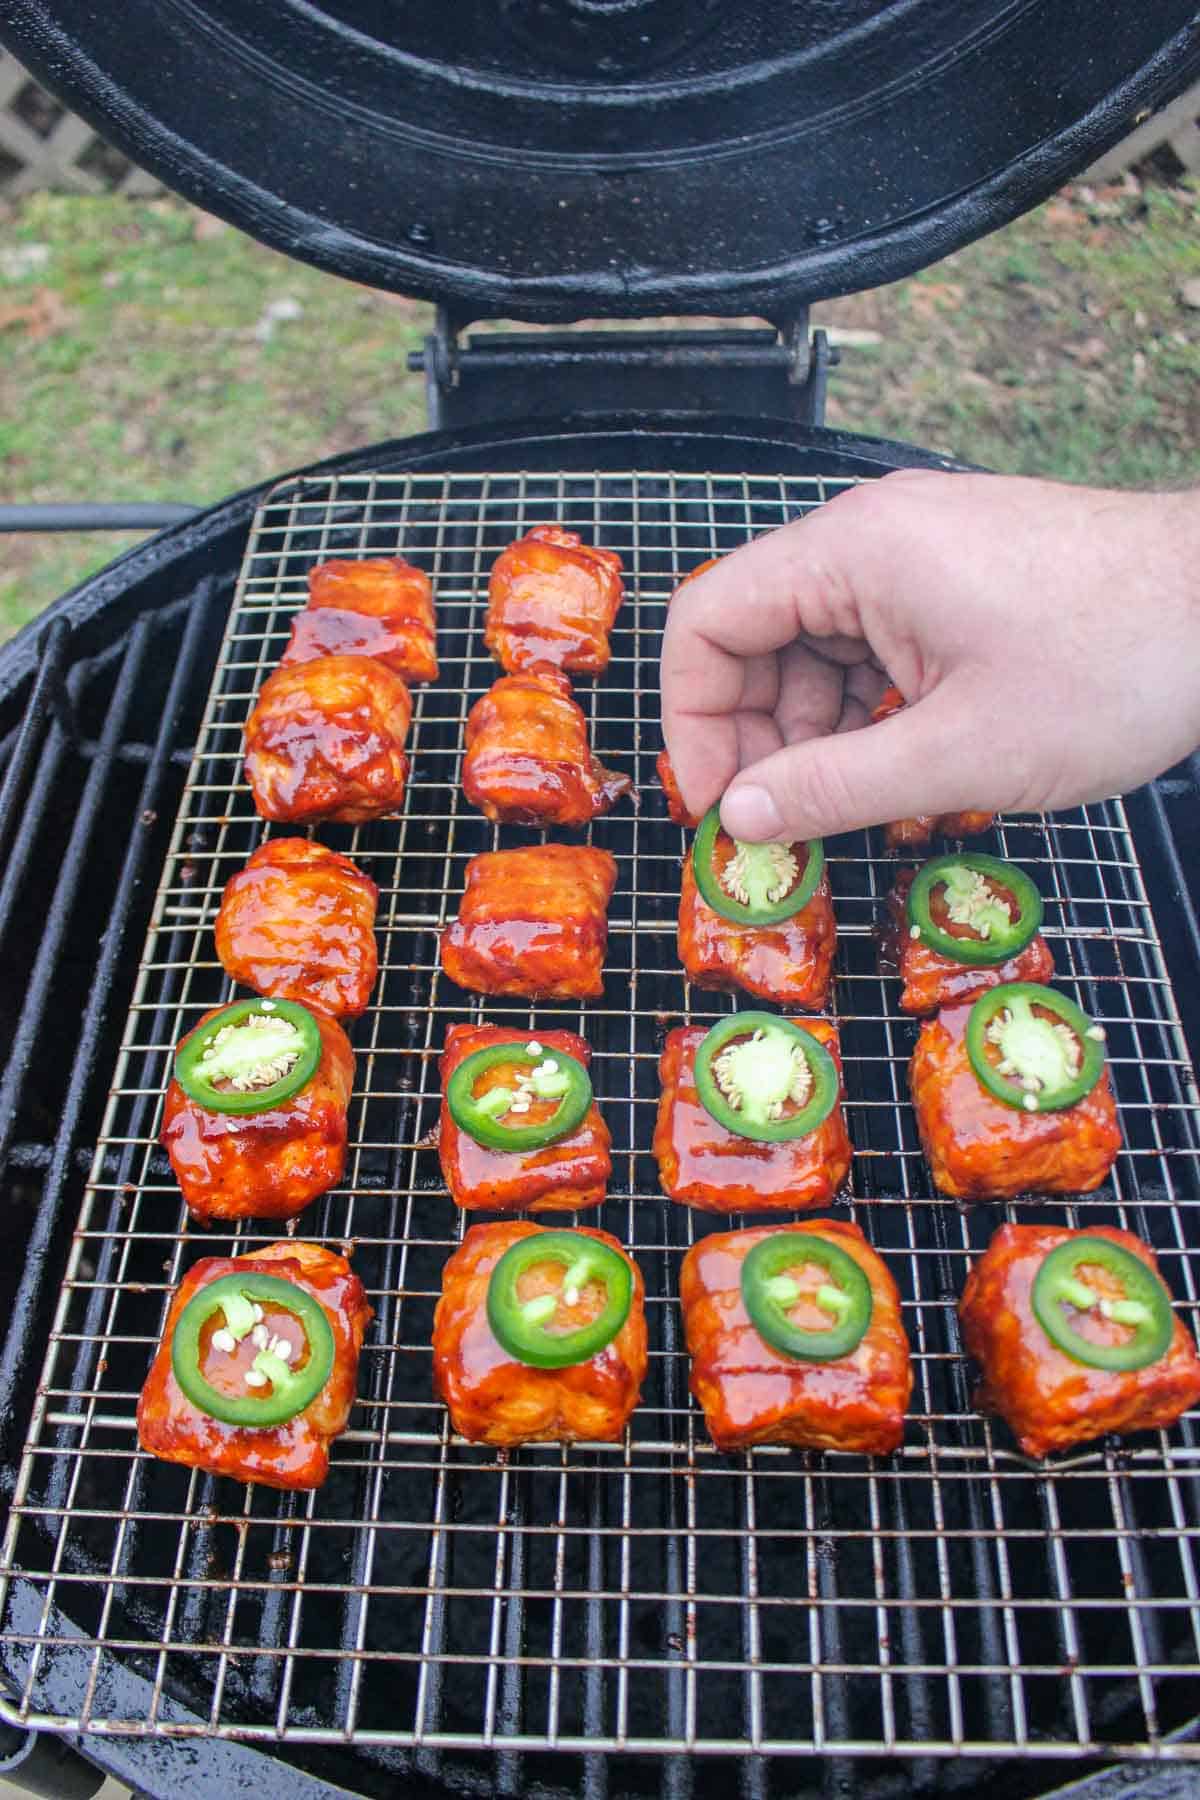 Adding a sliced jalapeño to the top of each salmon bite.